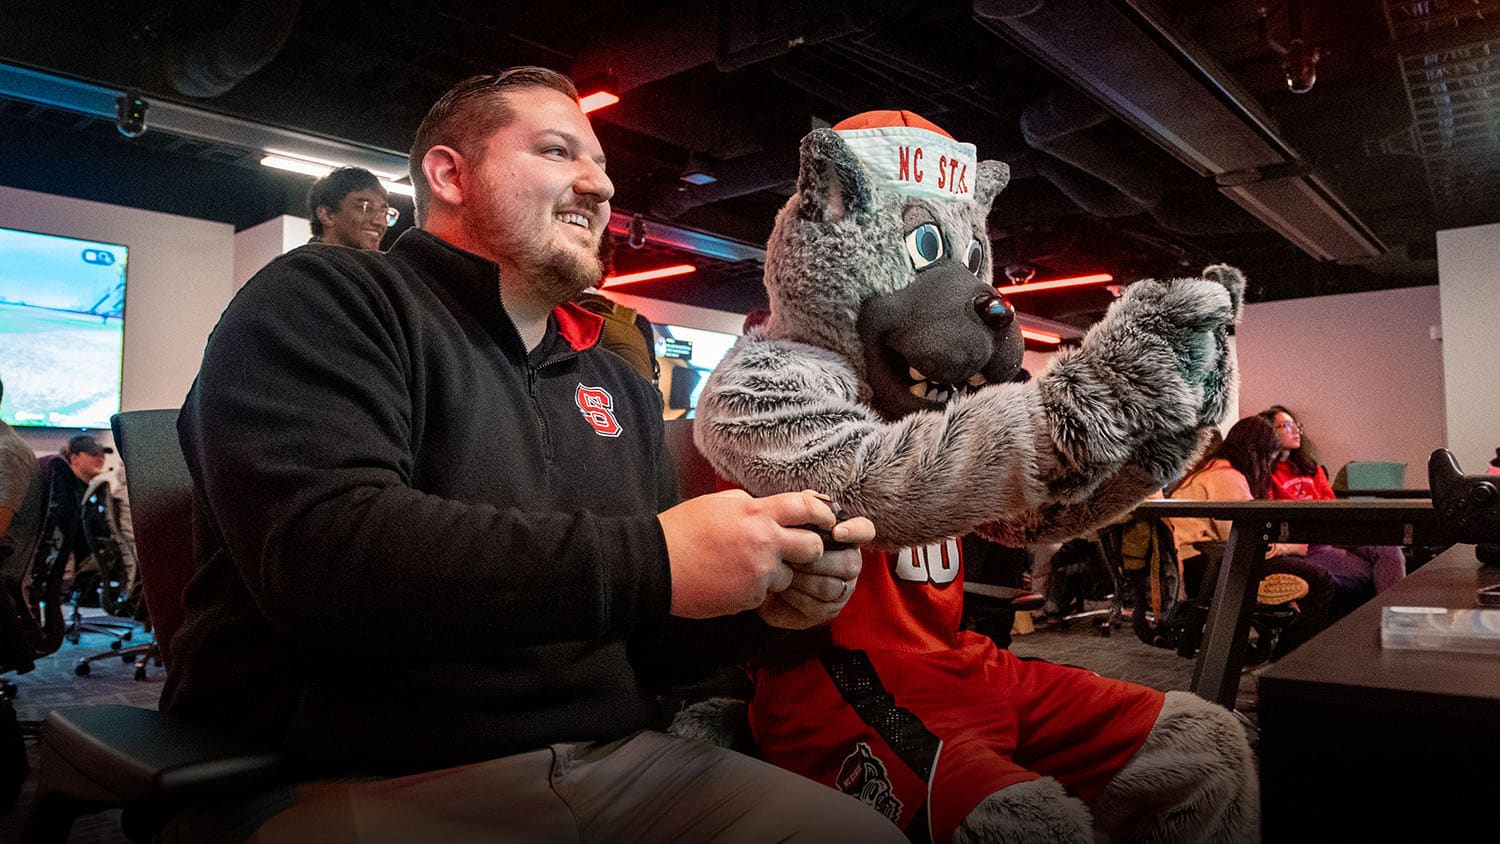 NC State Esports Program Director Cody Elsen enjoys a friendly gaming session with Mr. Wuf in the new NC State Gaming and Esports Lab.